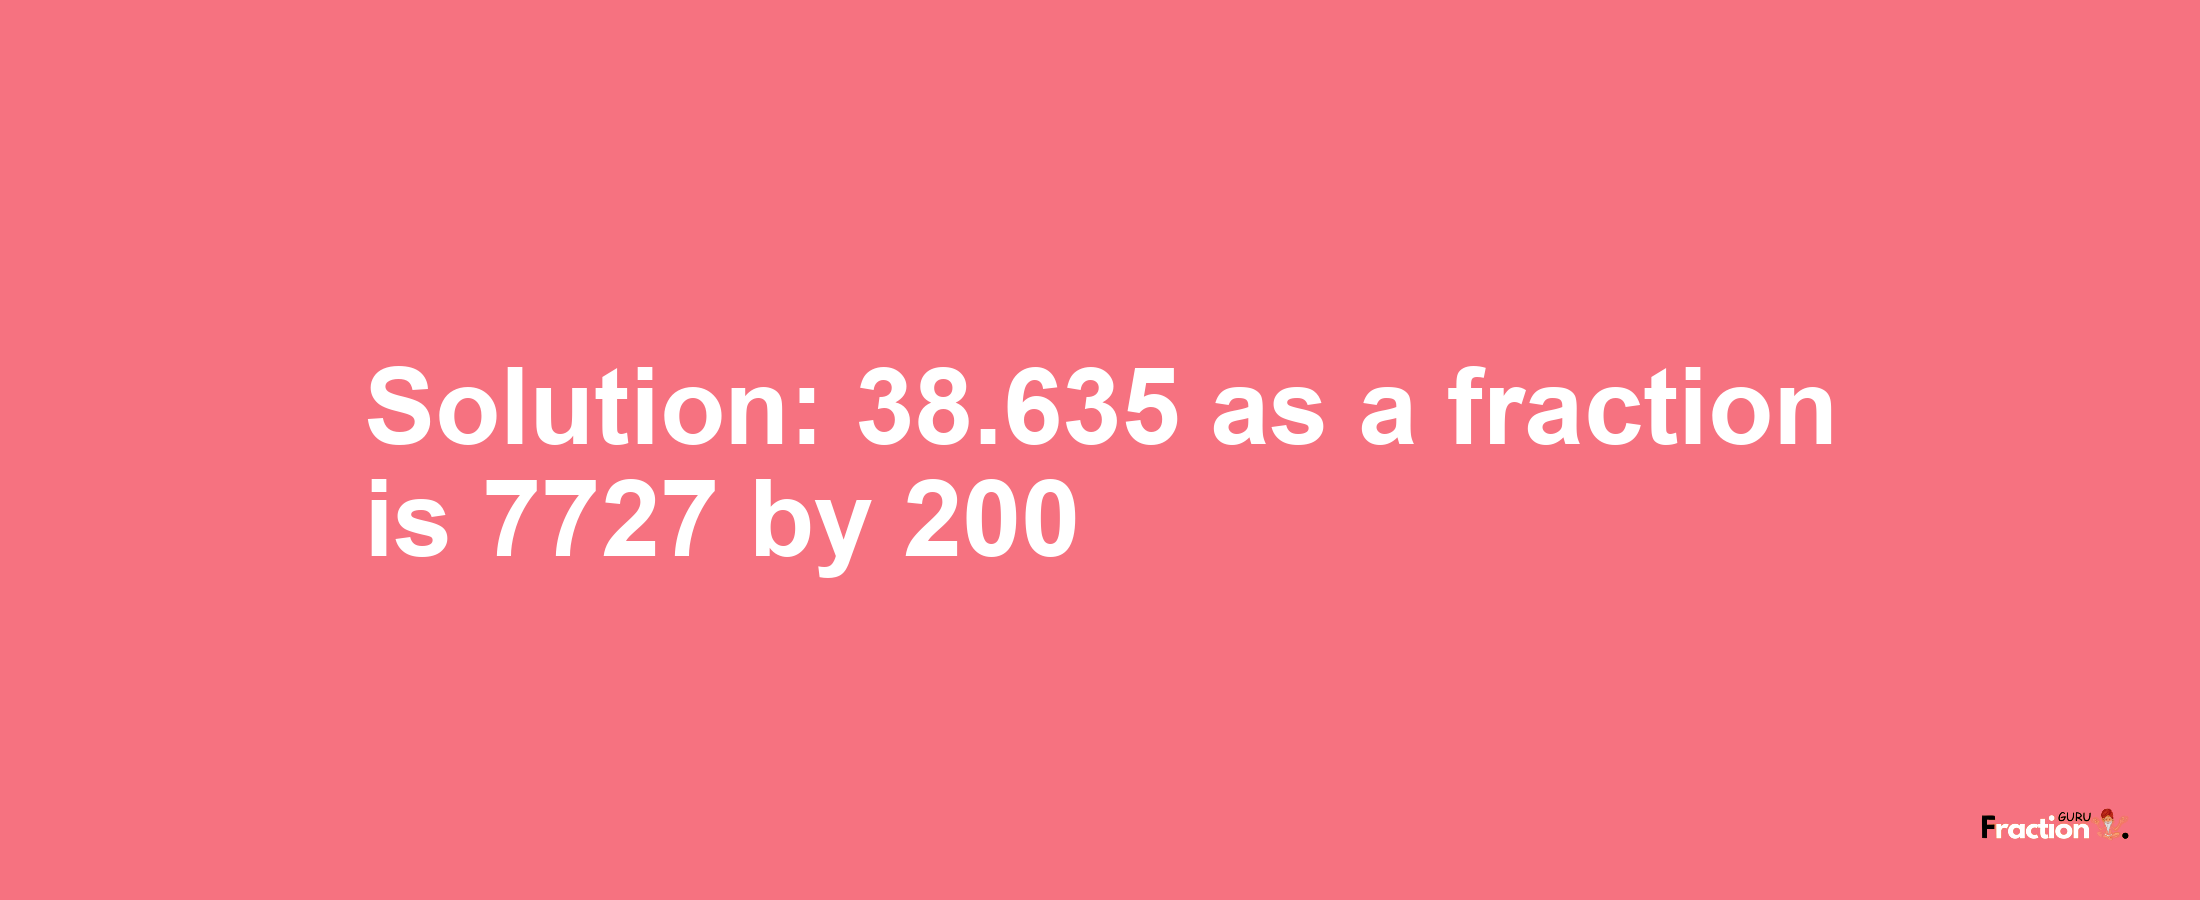 Solution:38.635 as a fraction is 7727/200